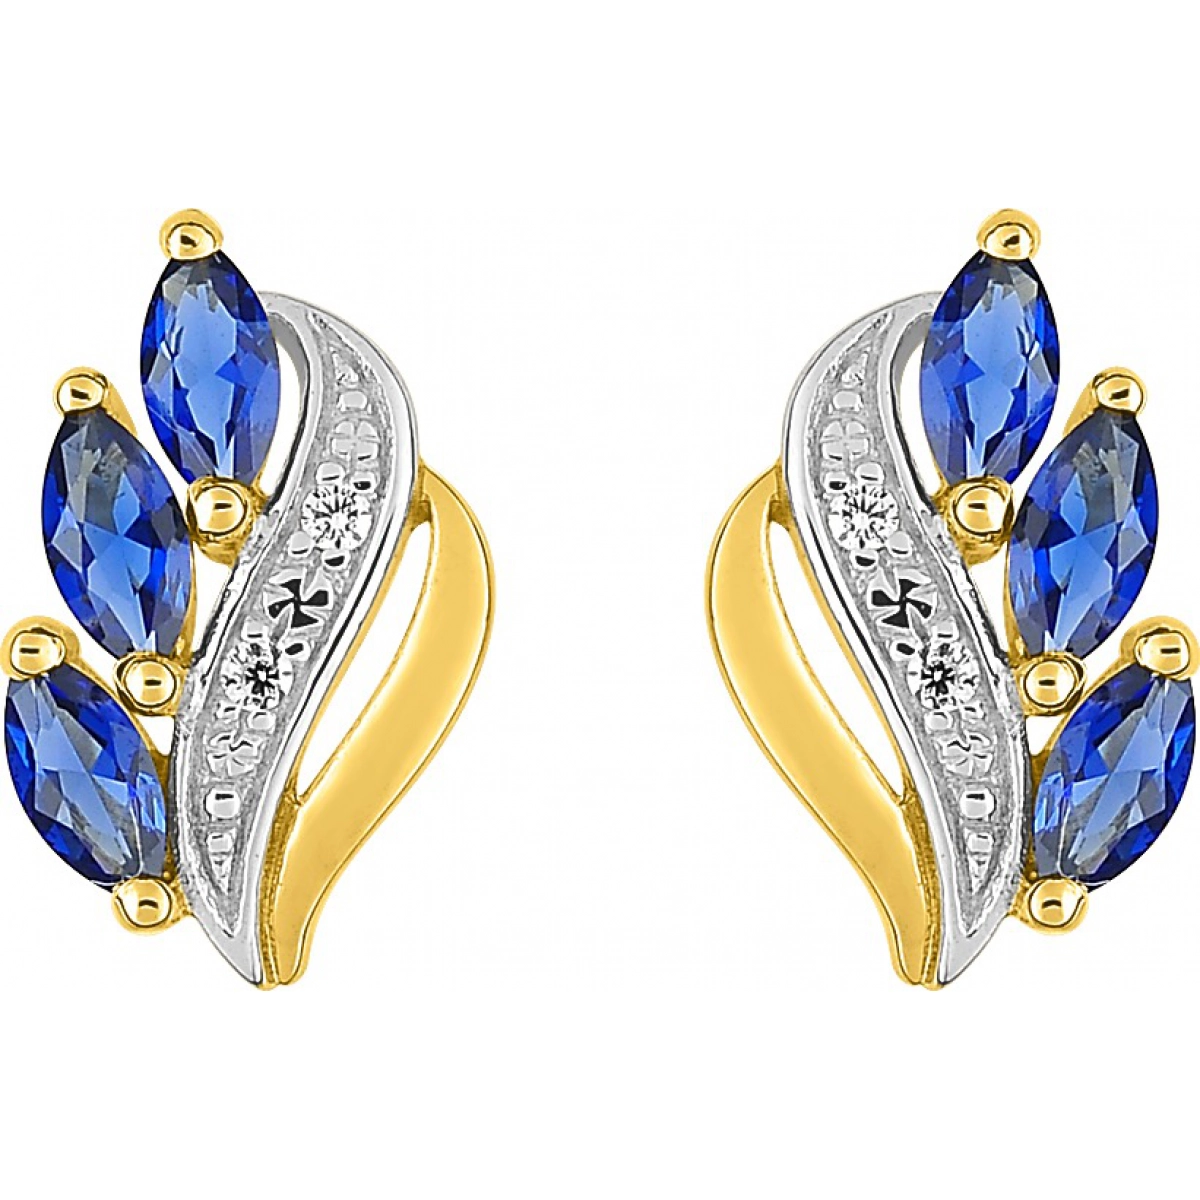 Earrings pair w. synth sapphire and rhod gold plated Brass  Lua Blanca  135633.2.0